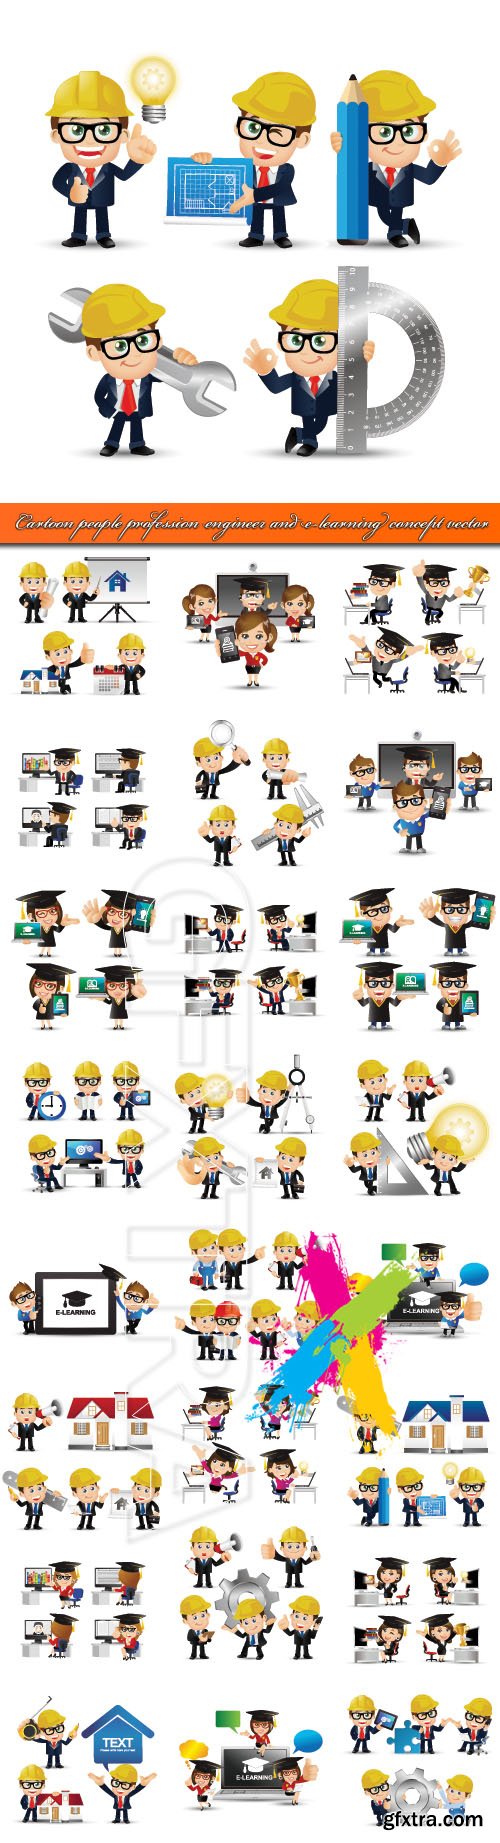 Cartoon people profession engineer and e-learning concept vector